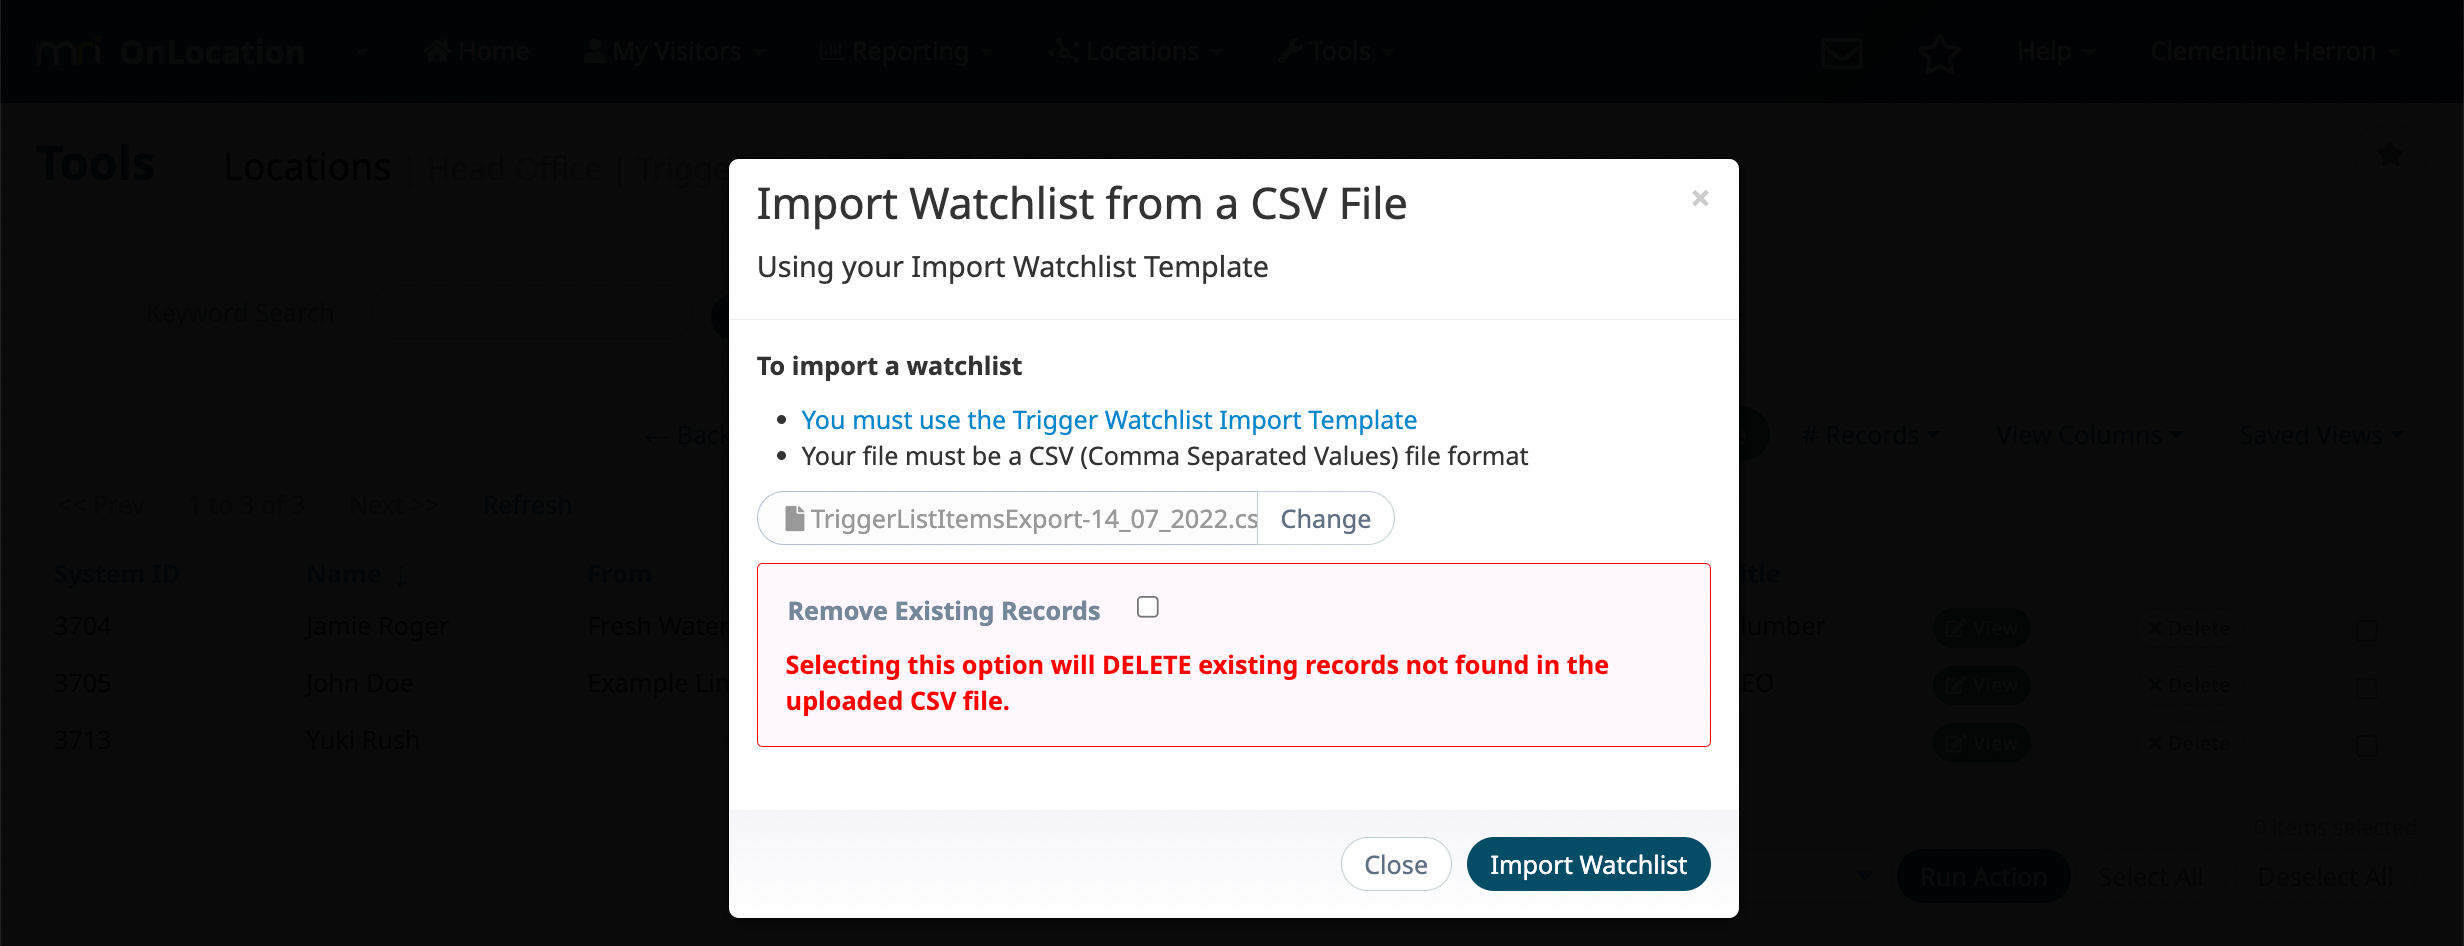 Watchlist-import-template.png